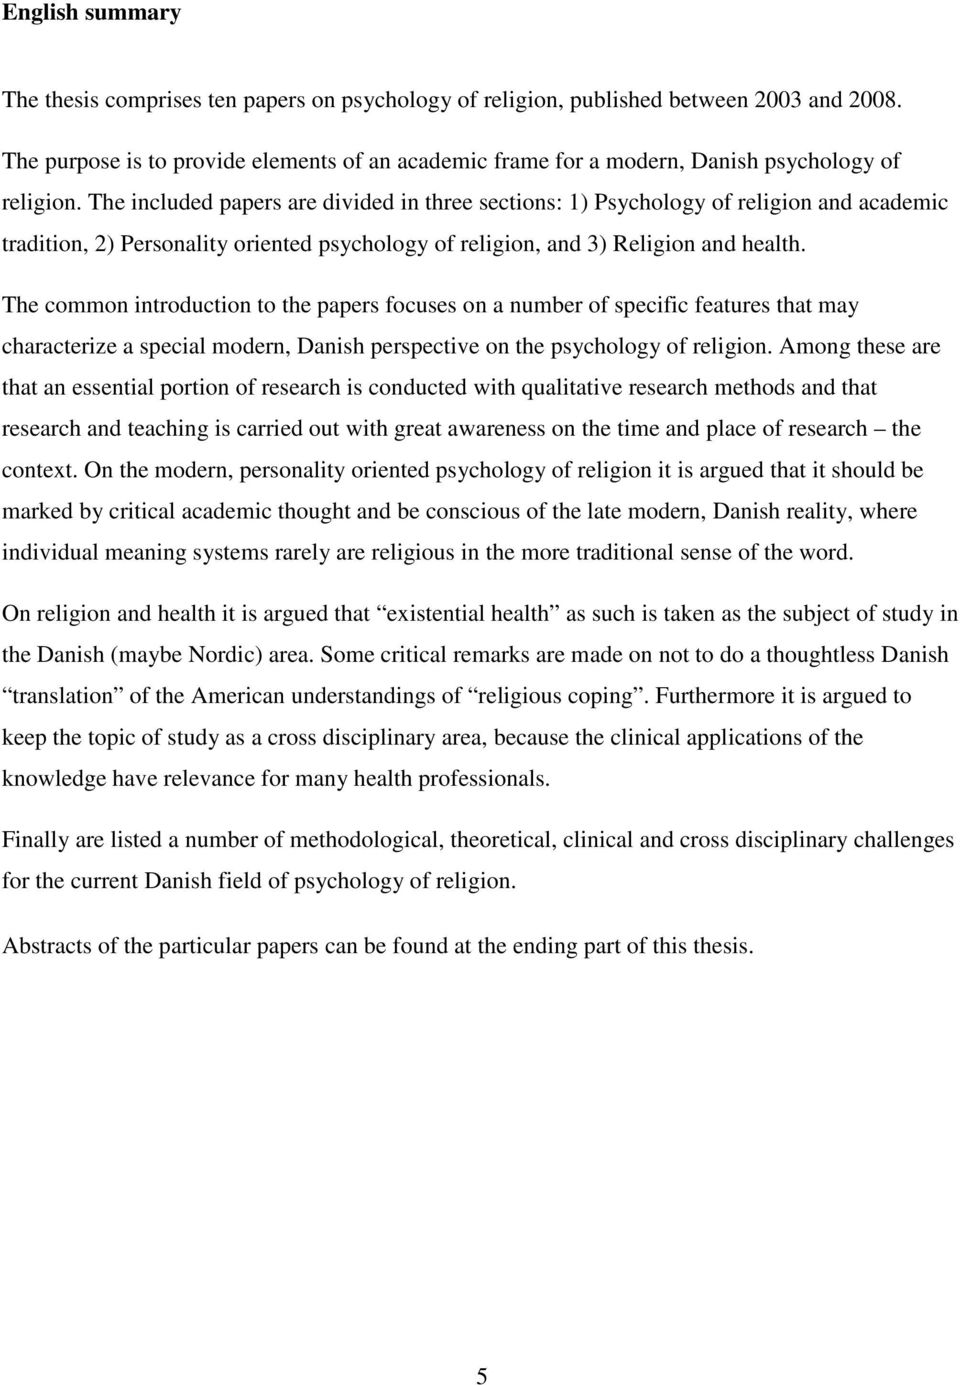 The included papers are divided in three sections: 1) Psychology of religion and academic tradition, 2) Personality oriented psychology of religion, and 3) Religion and health.